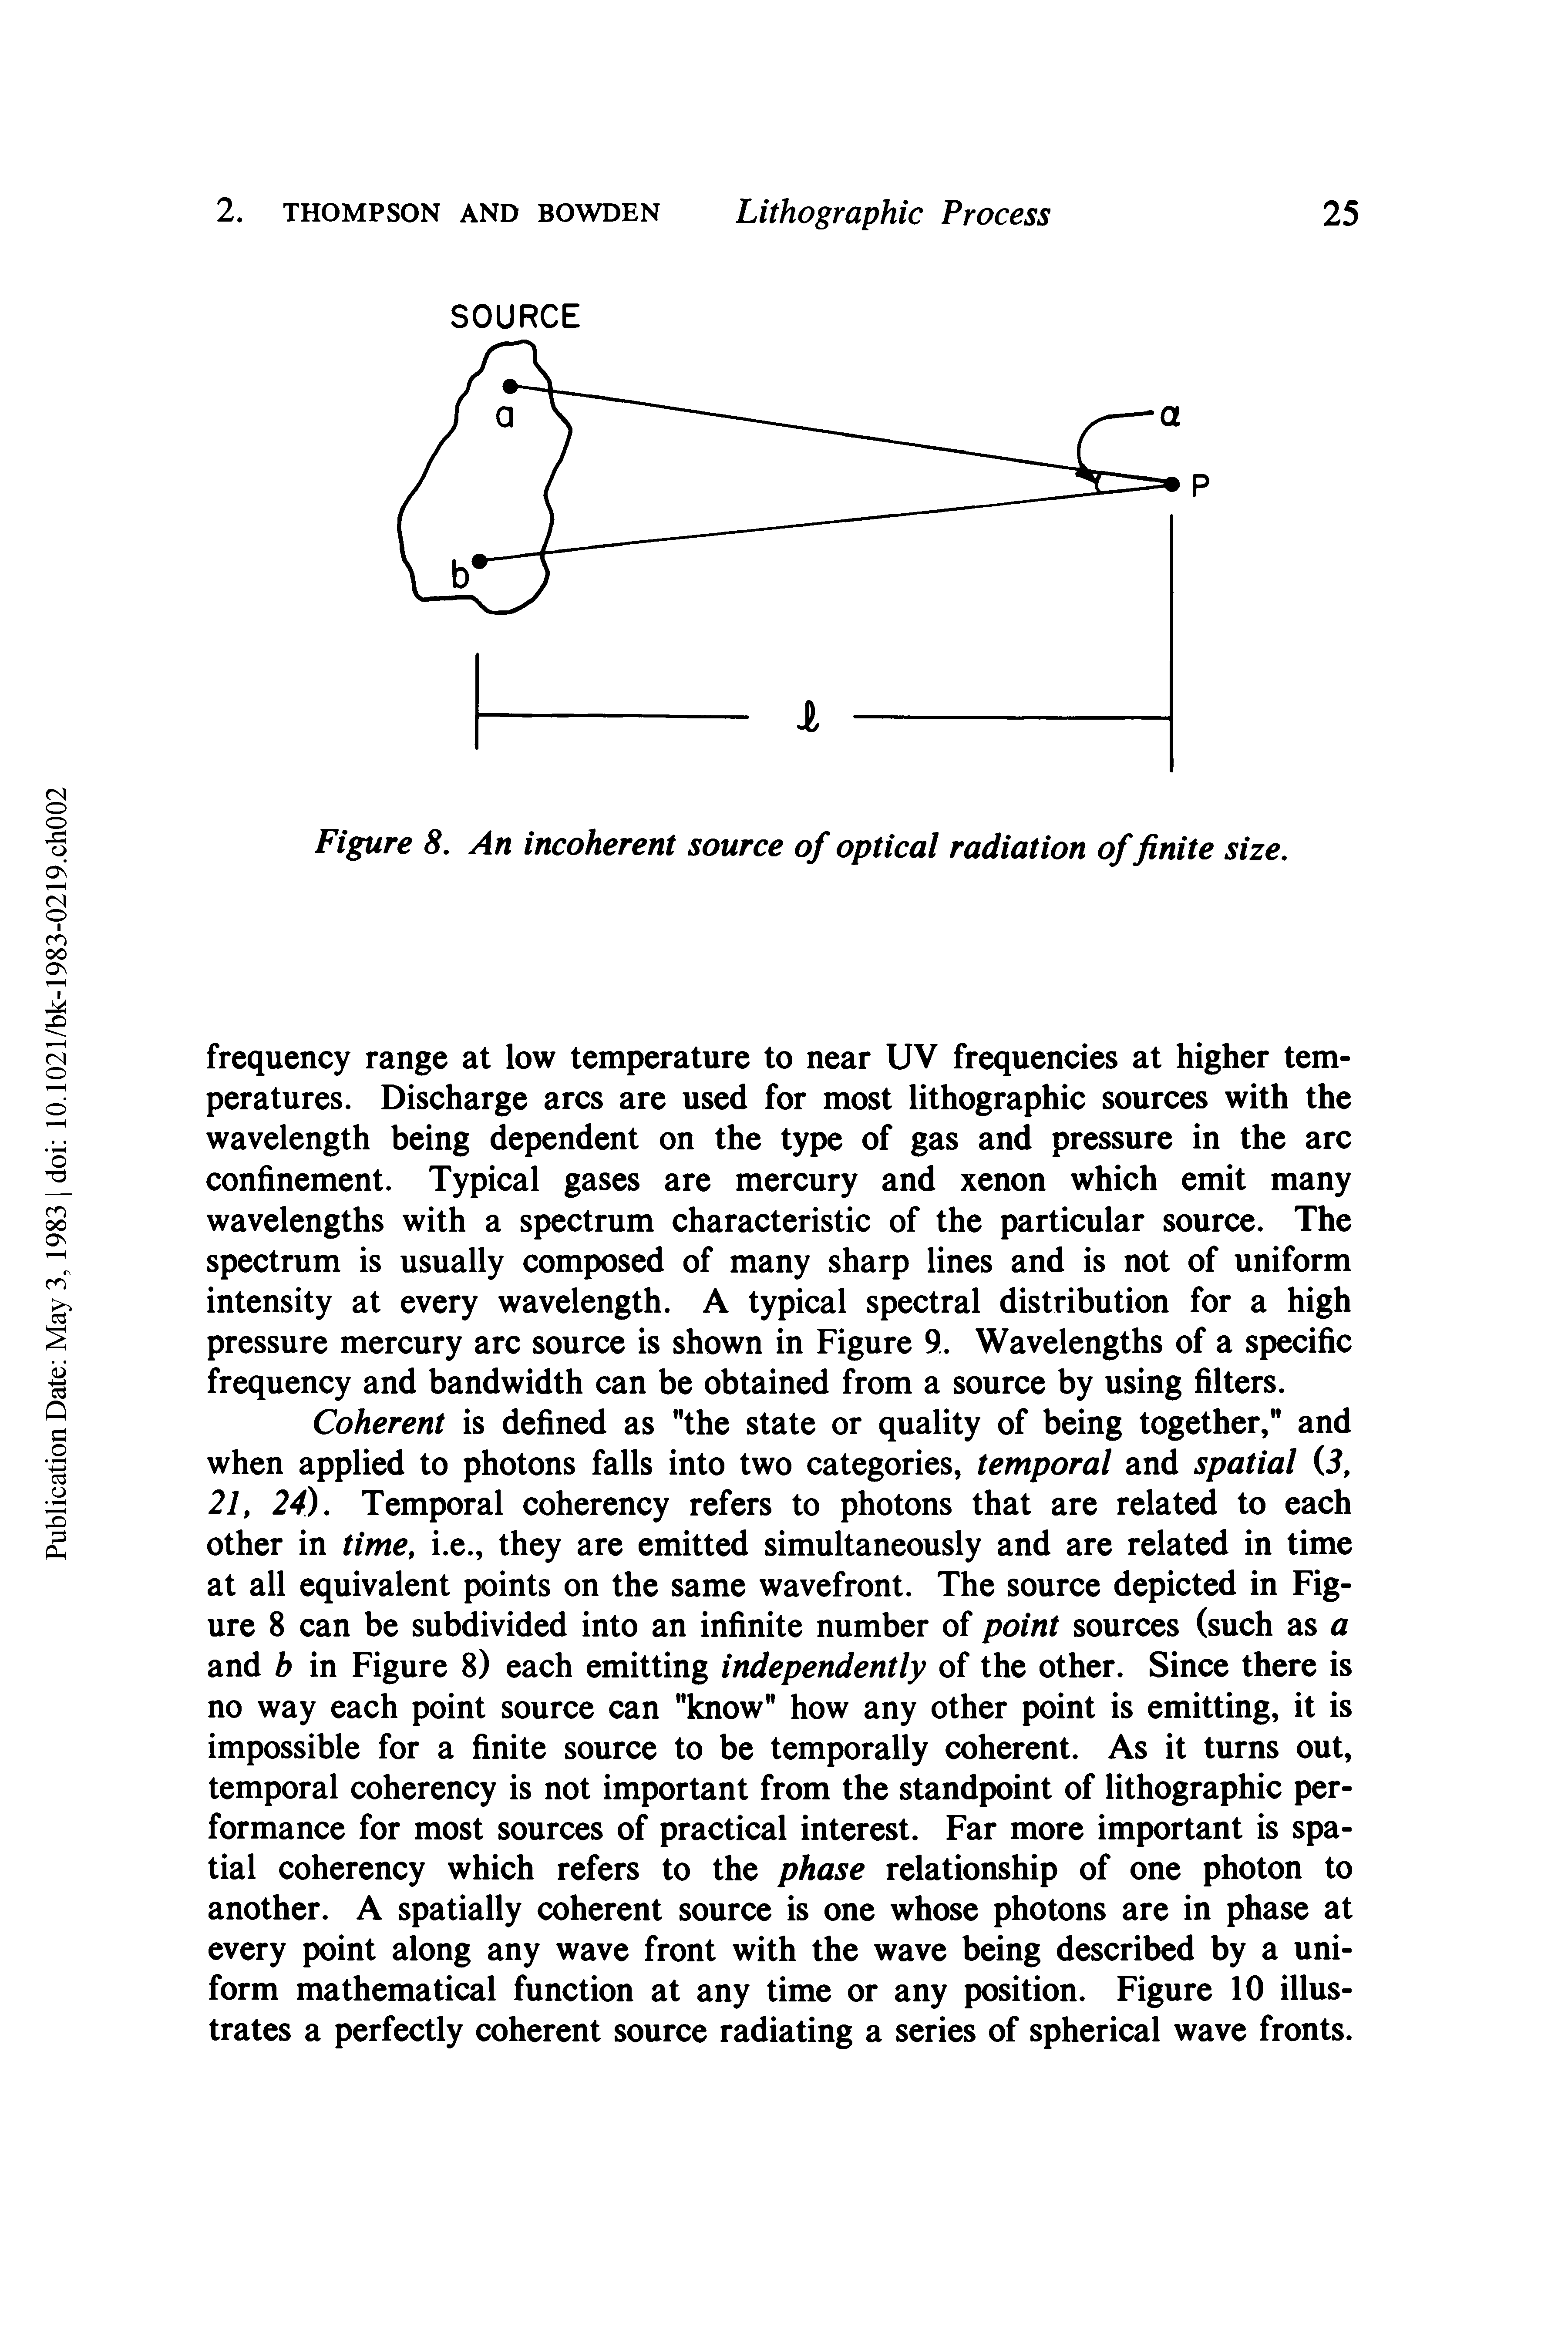 Figure 8. An incoherent source of optical radiation of finite size.